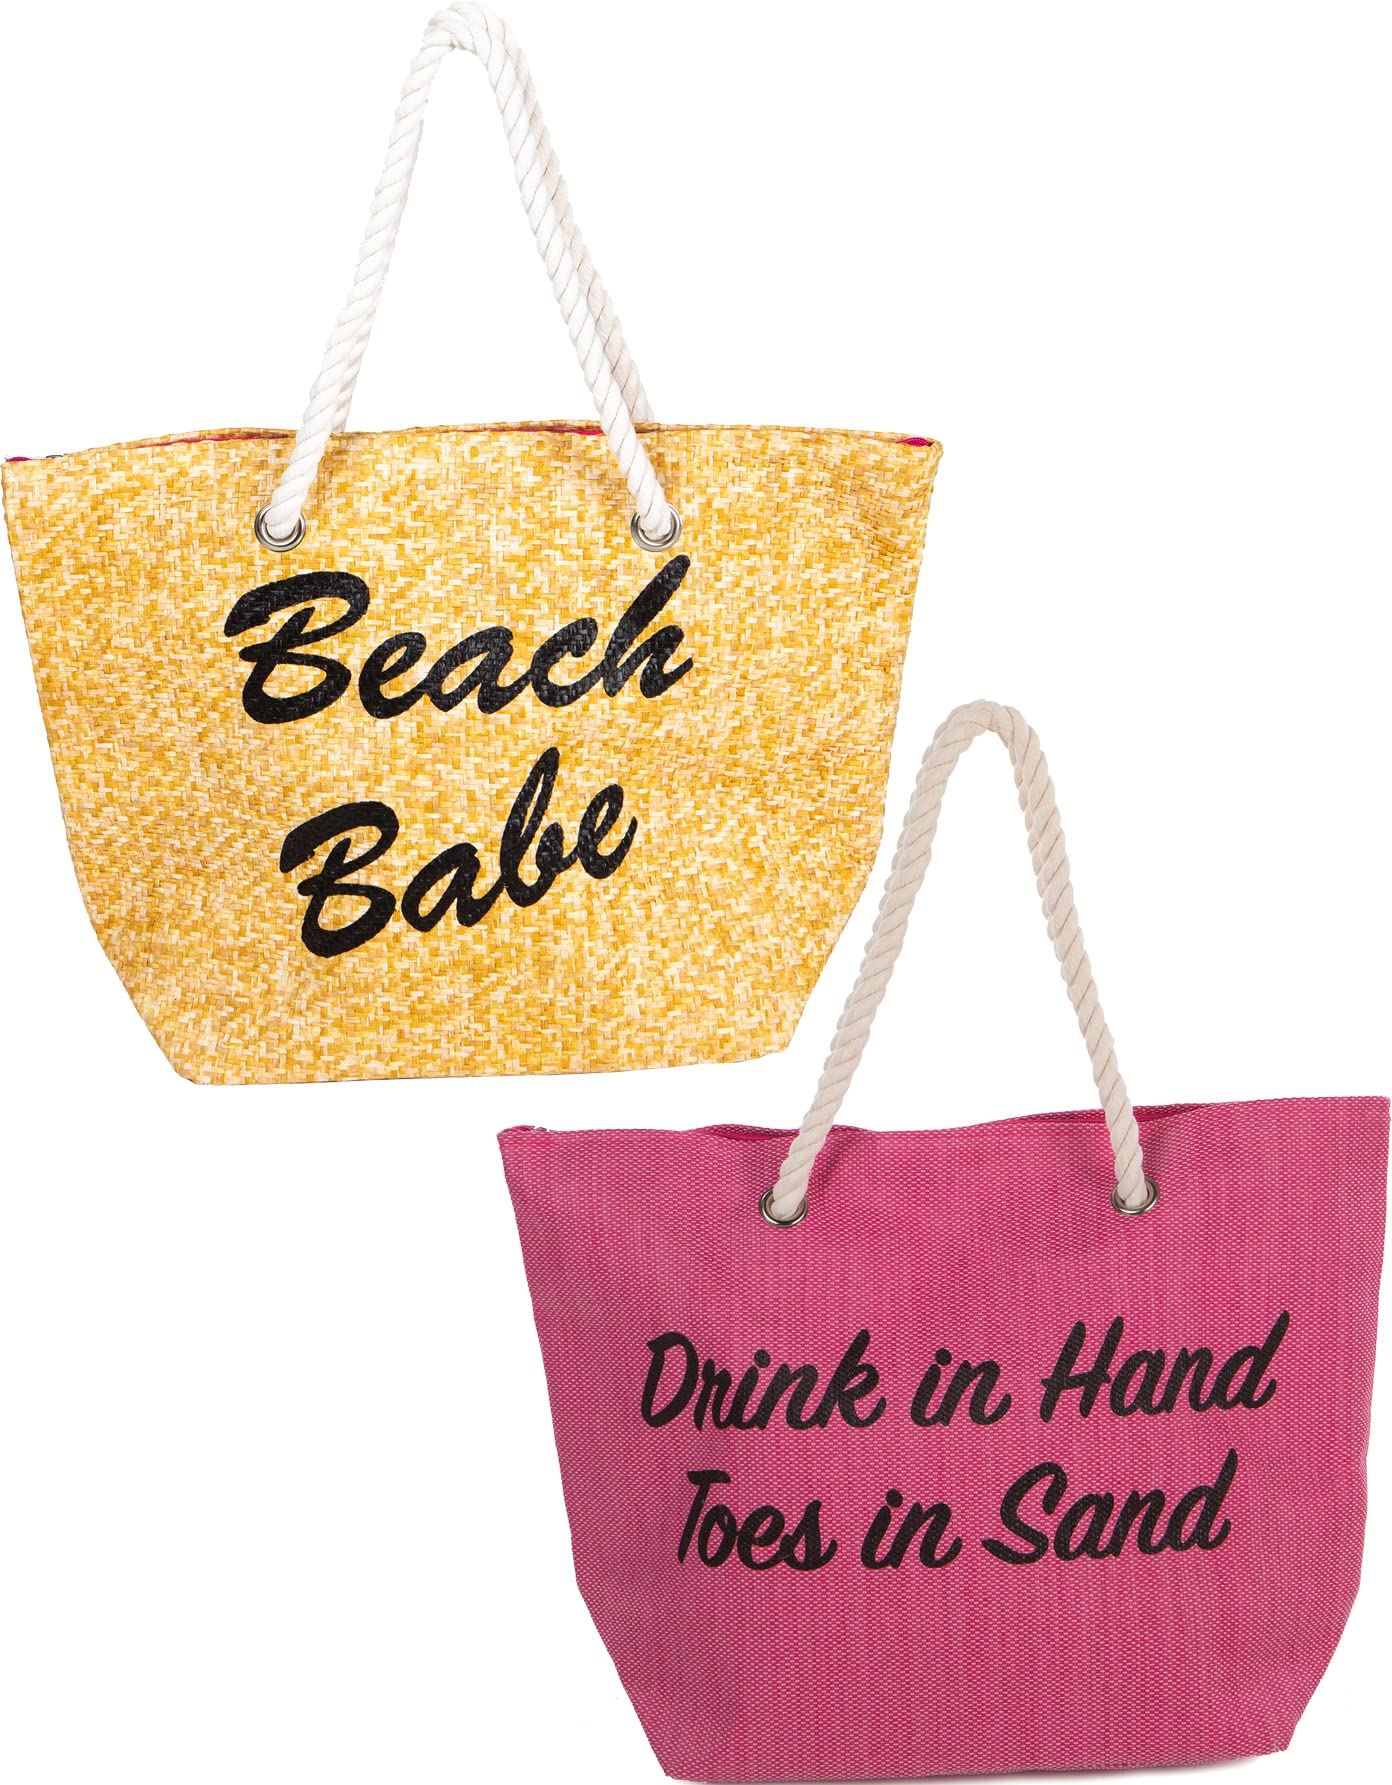 Sayings Beach Tote by Funky Junque